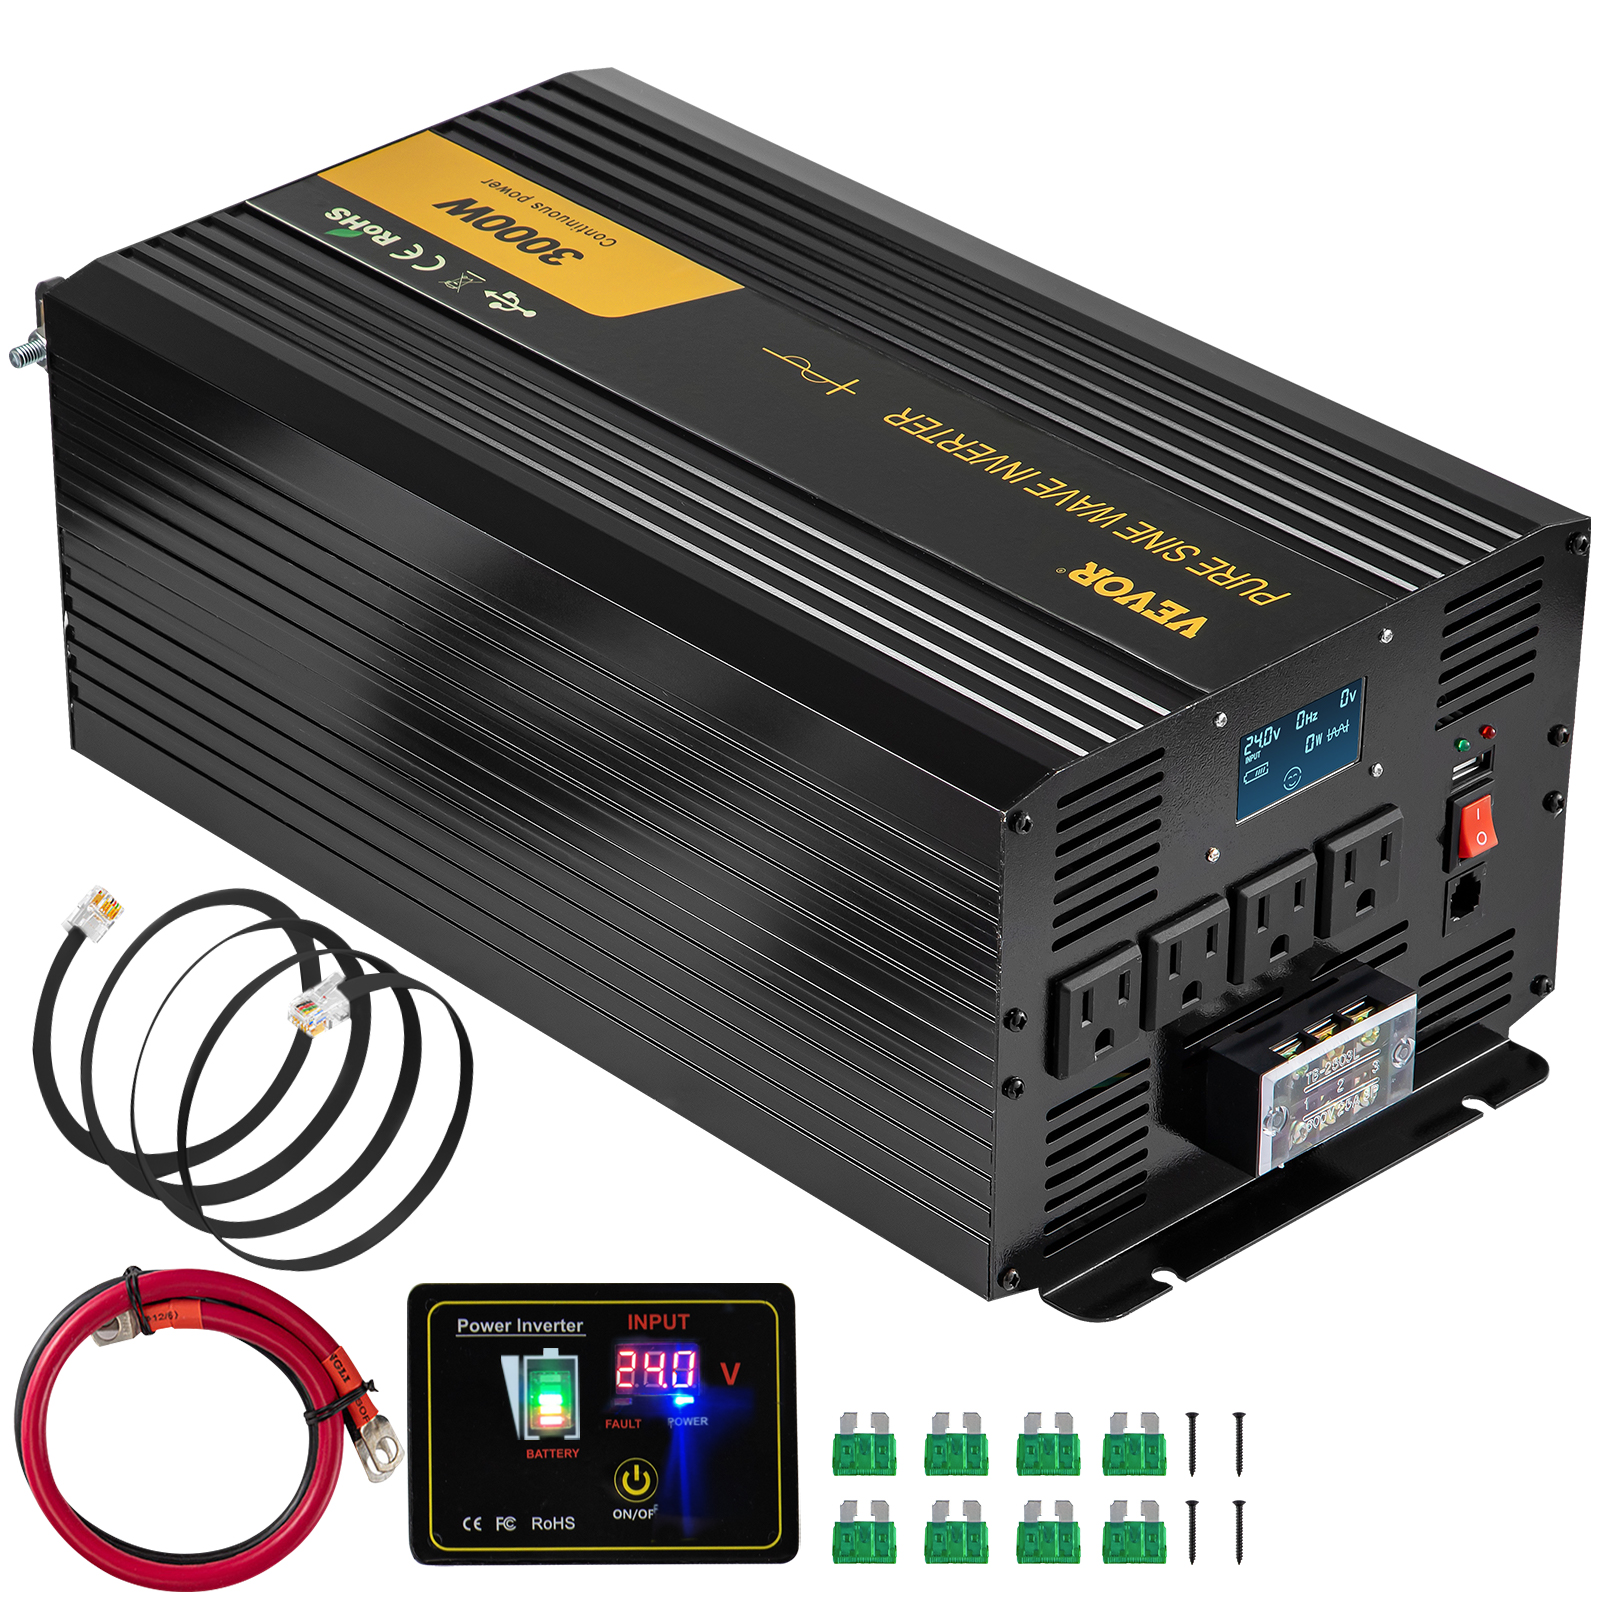 1500W Pure Sine Wave Power Inverter 12V DC to 110V AC Converter with 2 AC  Outlets, USB Port and Bluetooth, 1500 watt Car Inverter for Camping, Truck